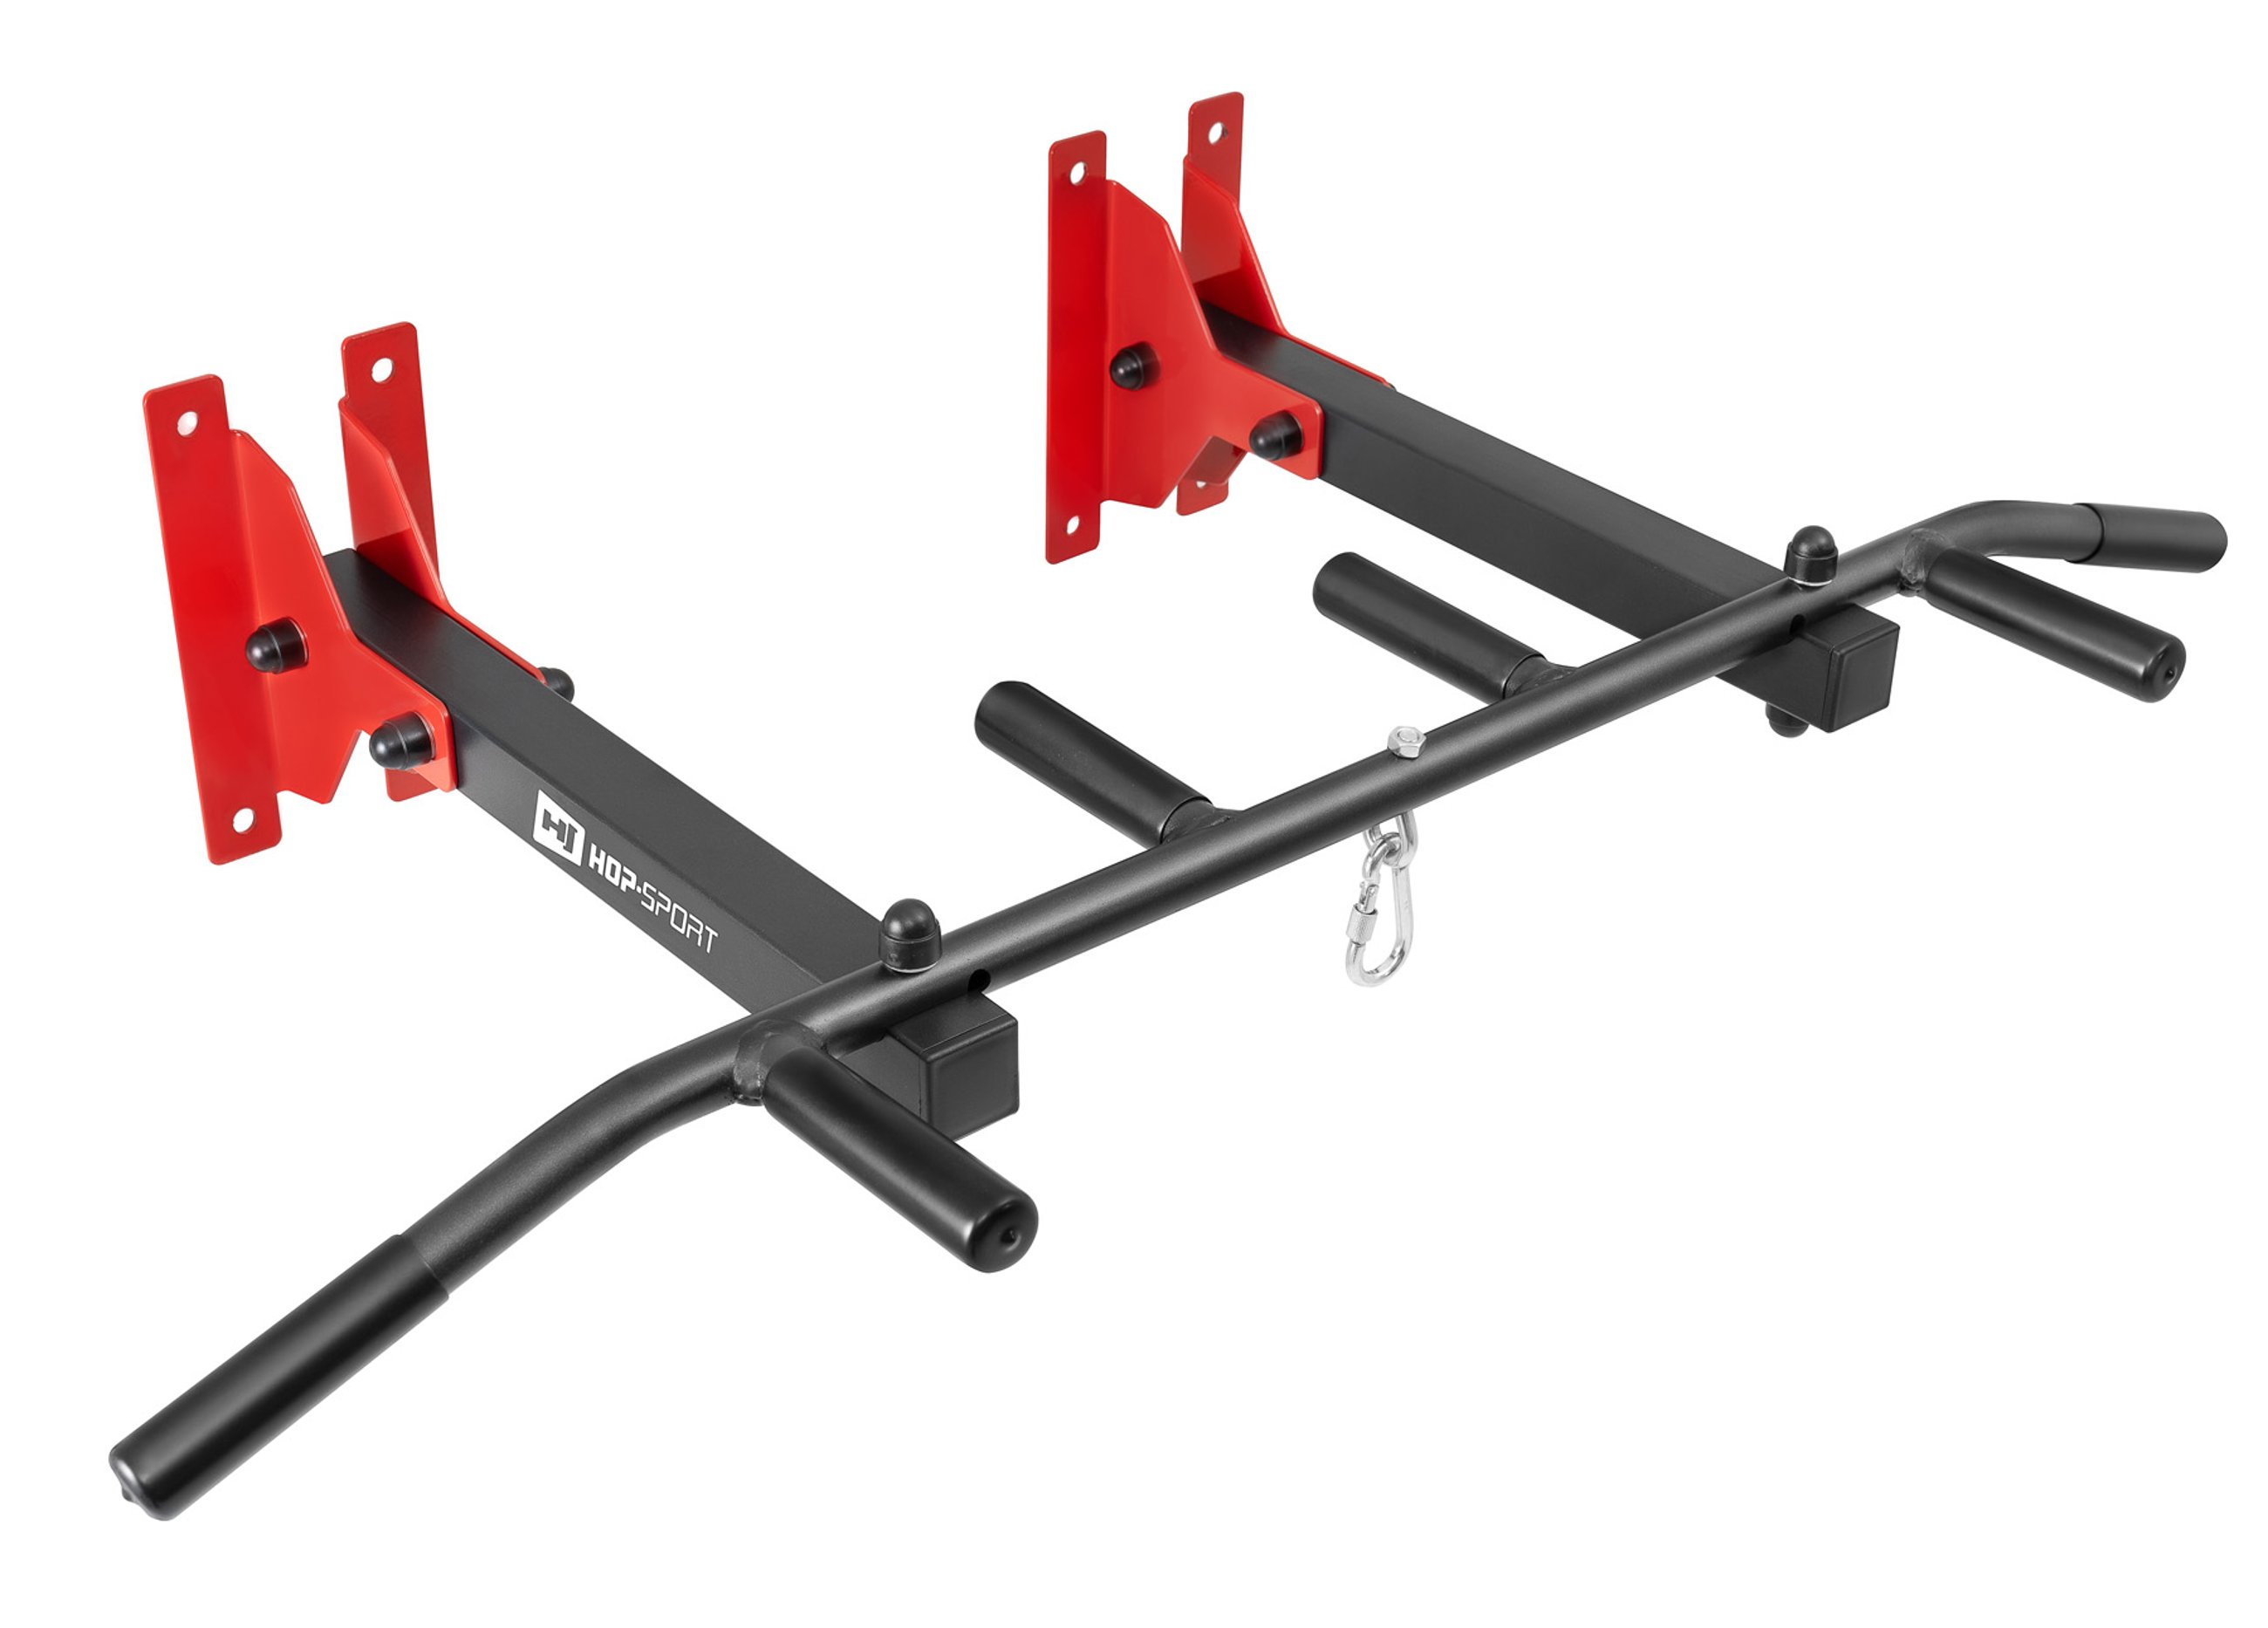 Ceiling & Wall Mounted Pull Up Bar HS-2006K w/ Gym Gloves